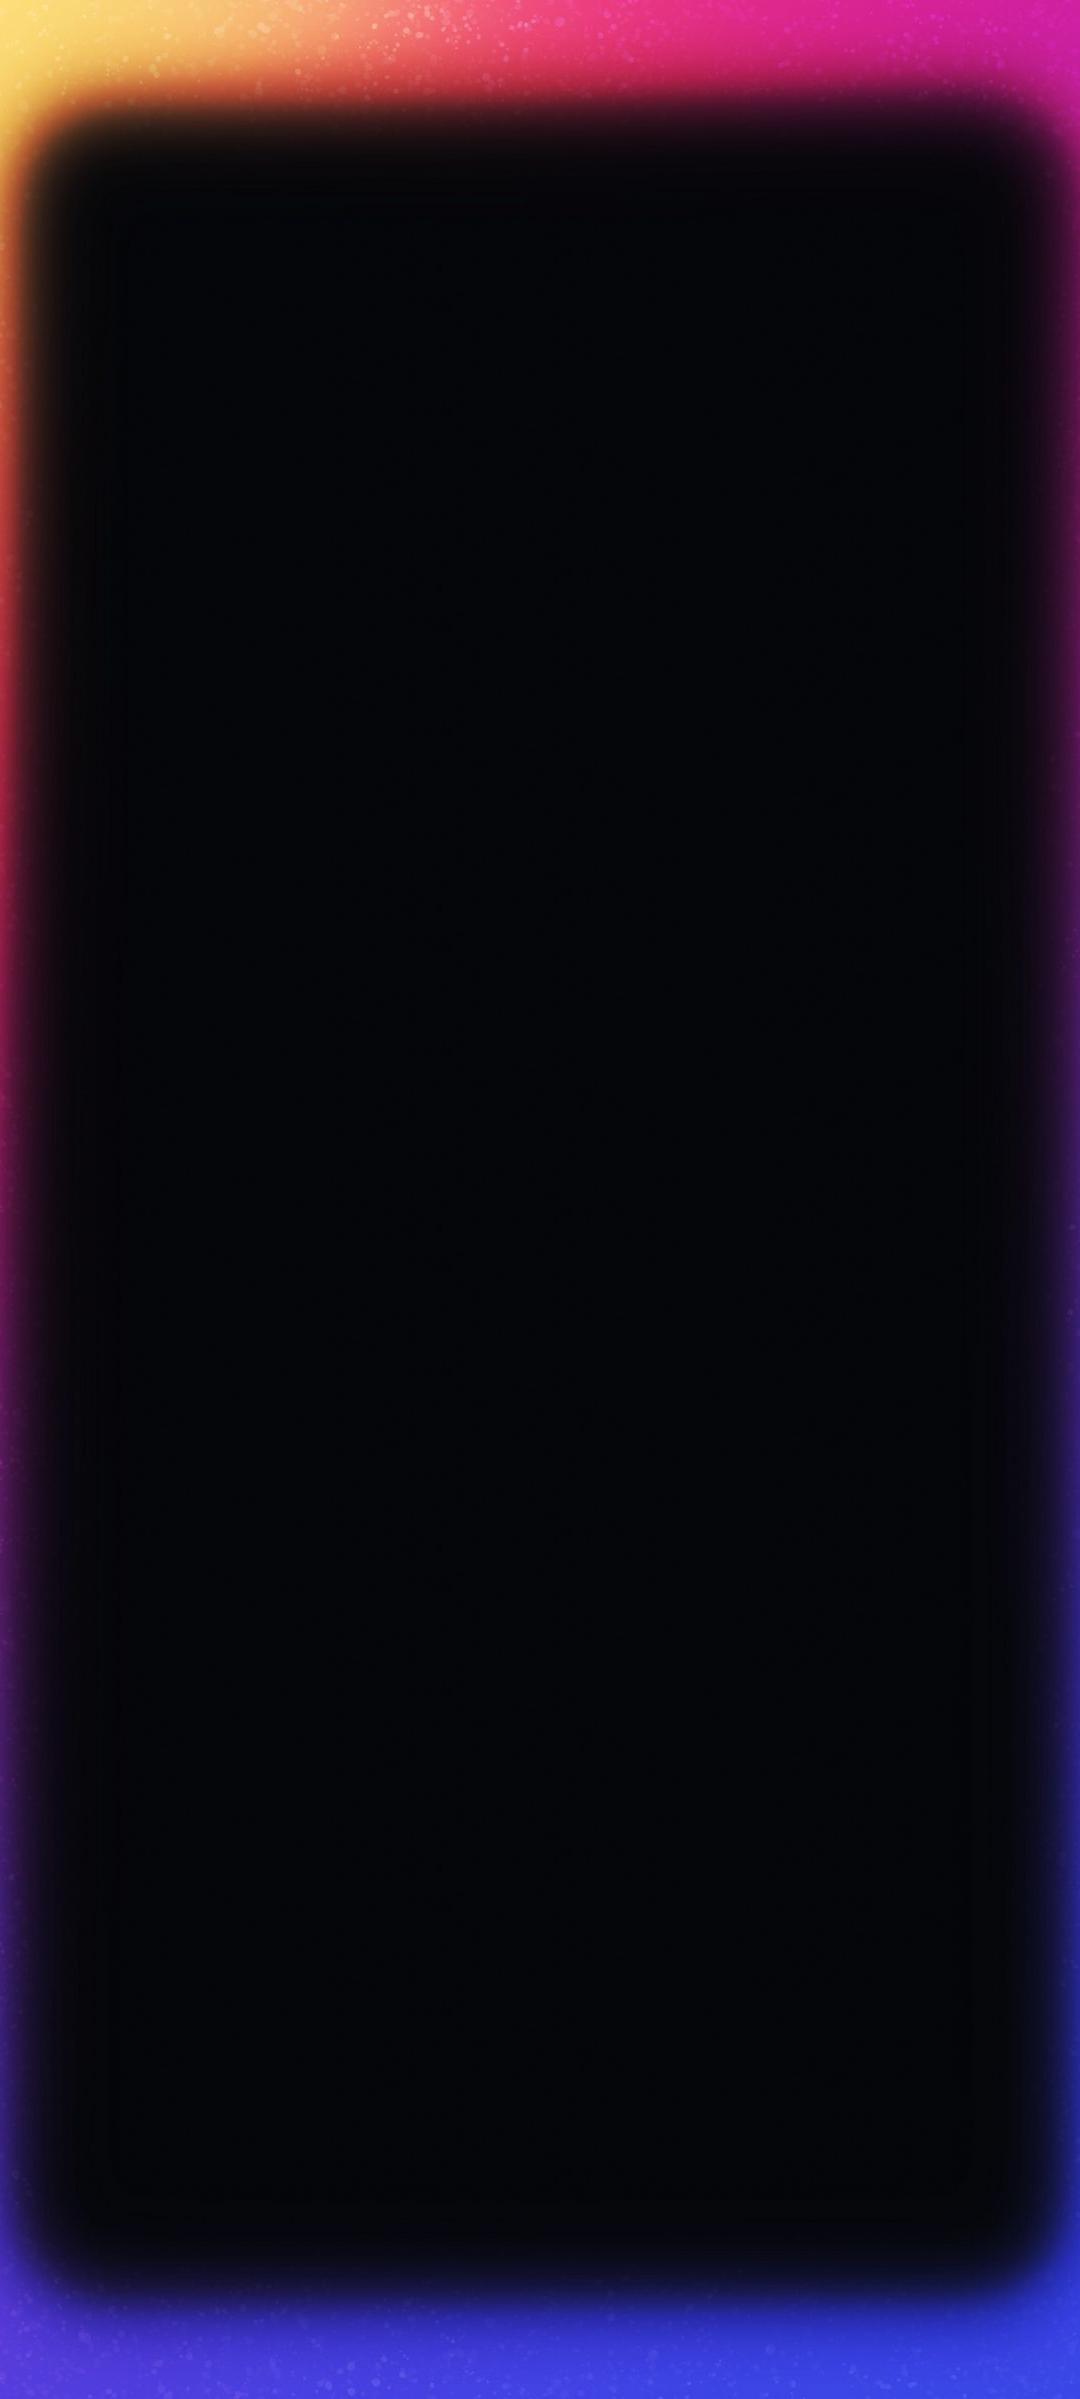 Border Amoled Neon Colors Black Wallpaper S29 Chill Out